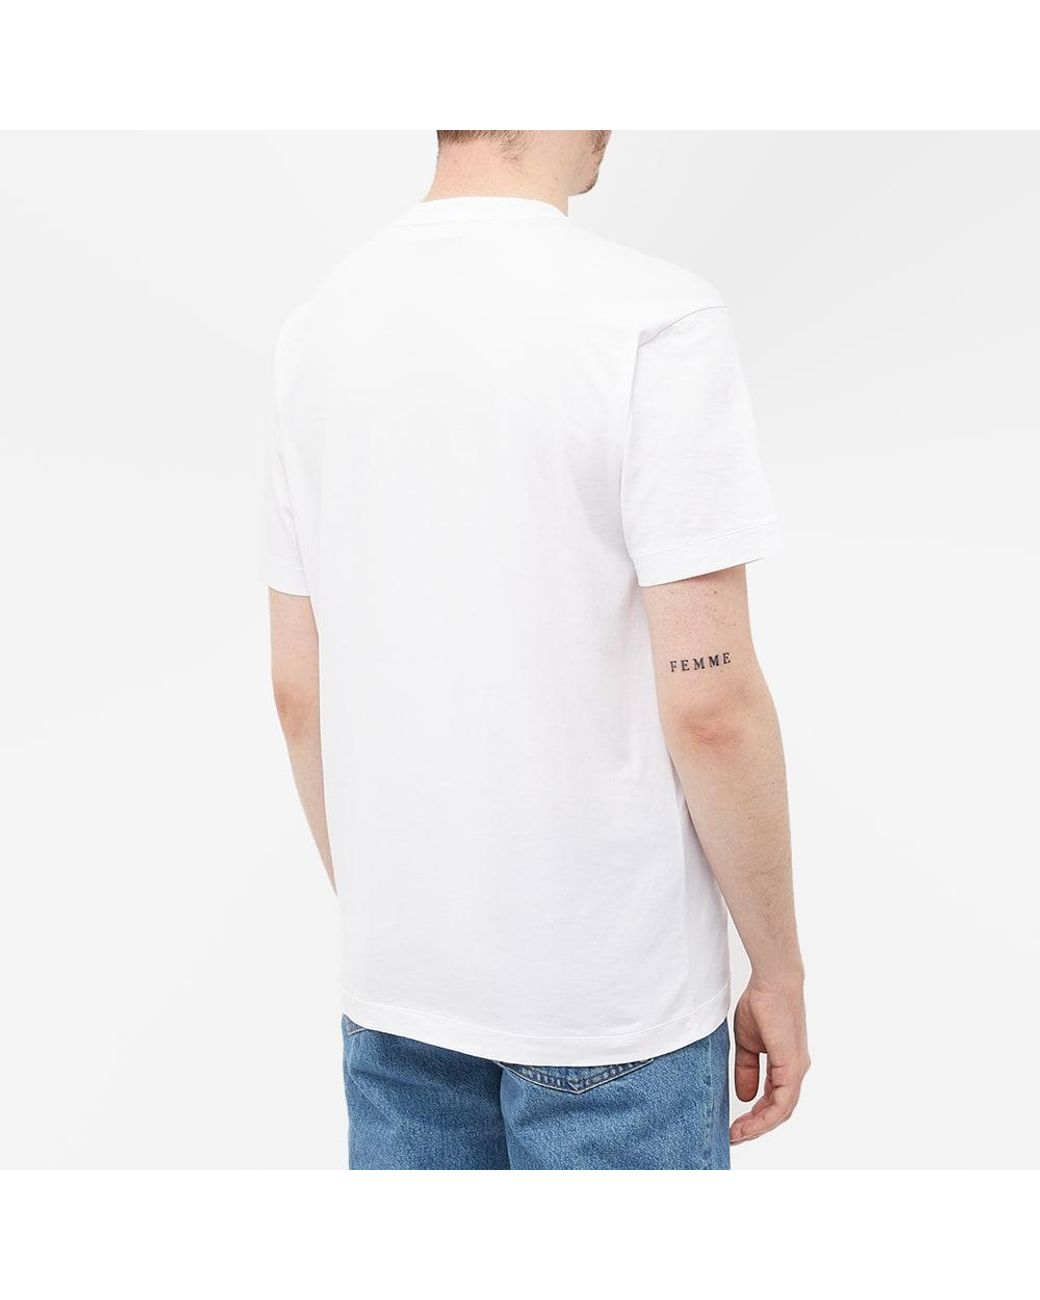 Stone Island Patch T-shirt in White for Men | Lyst UK